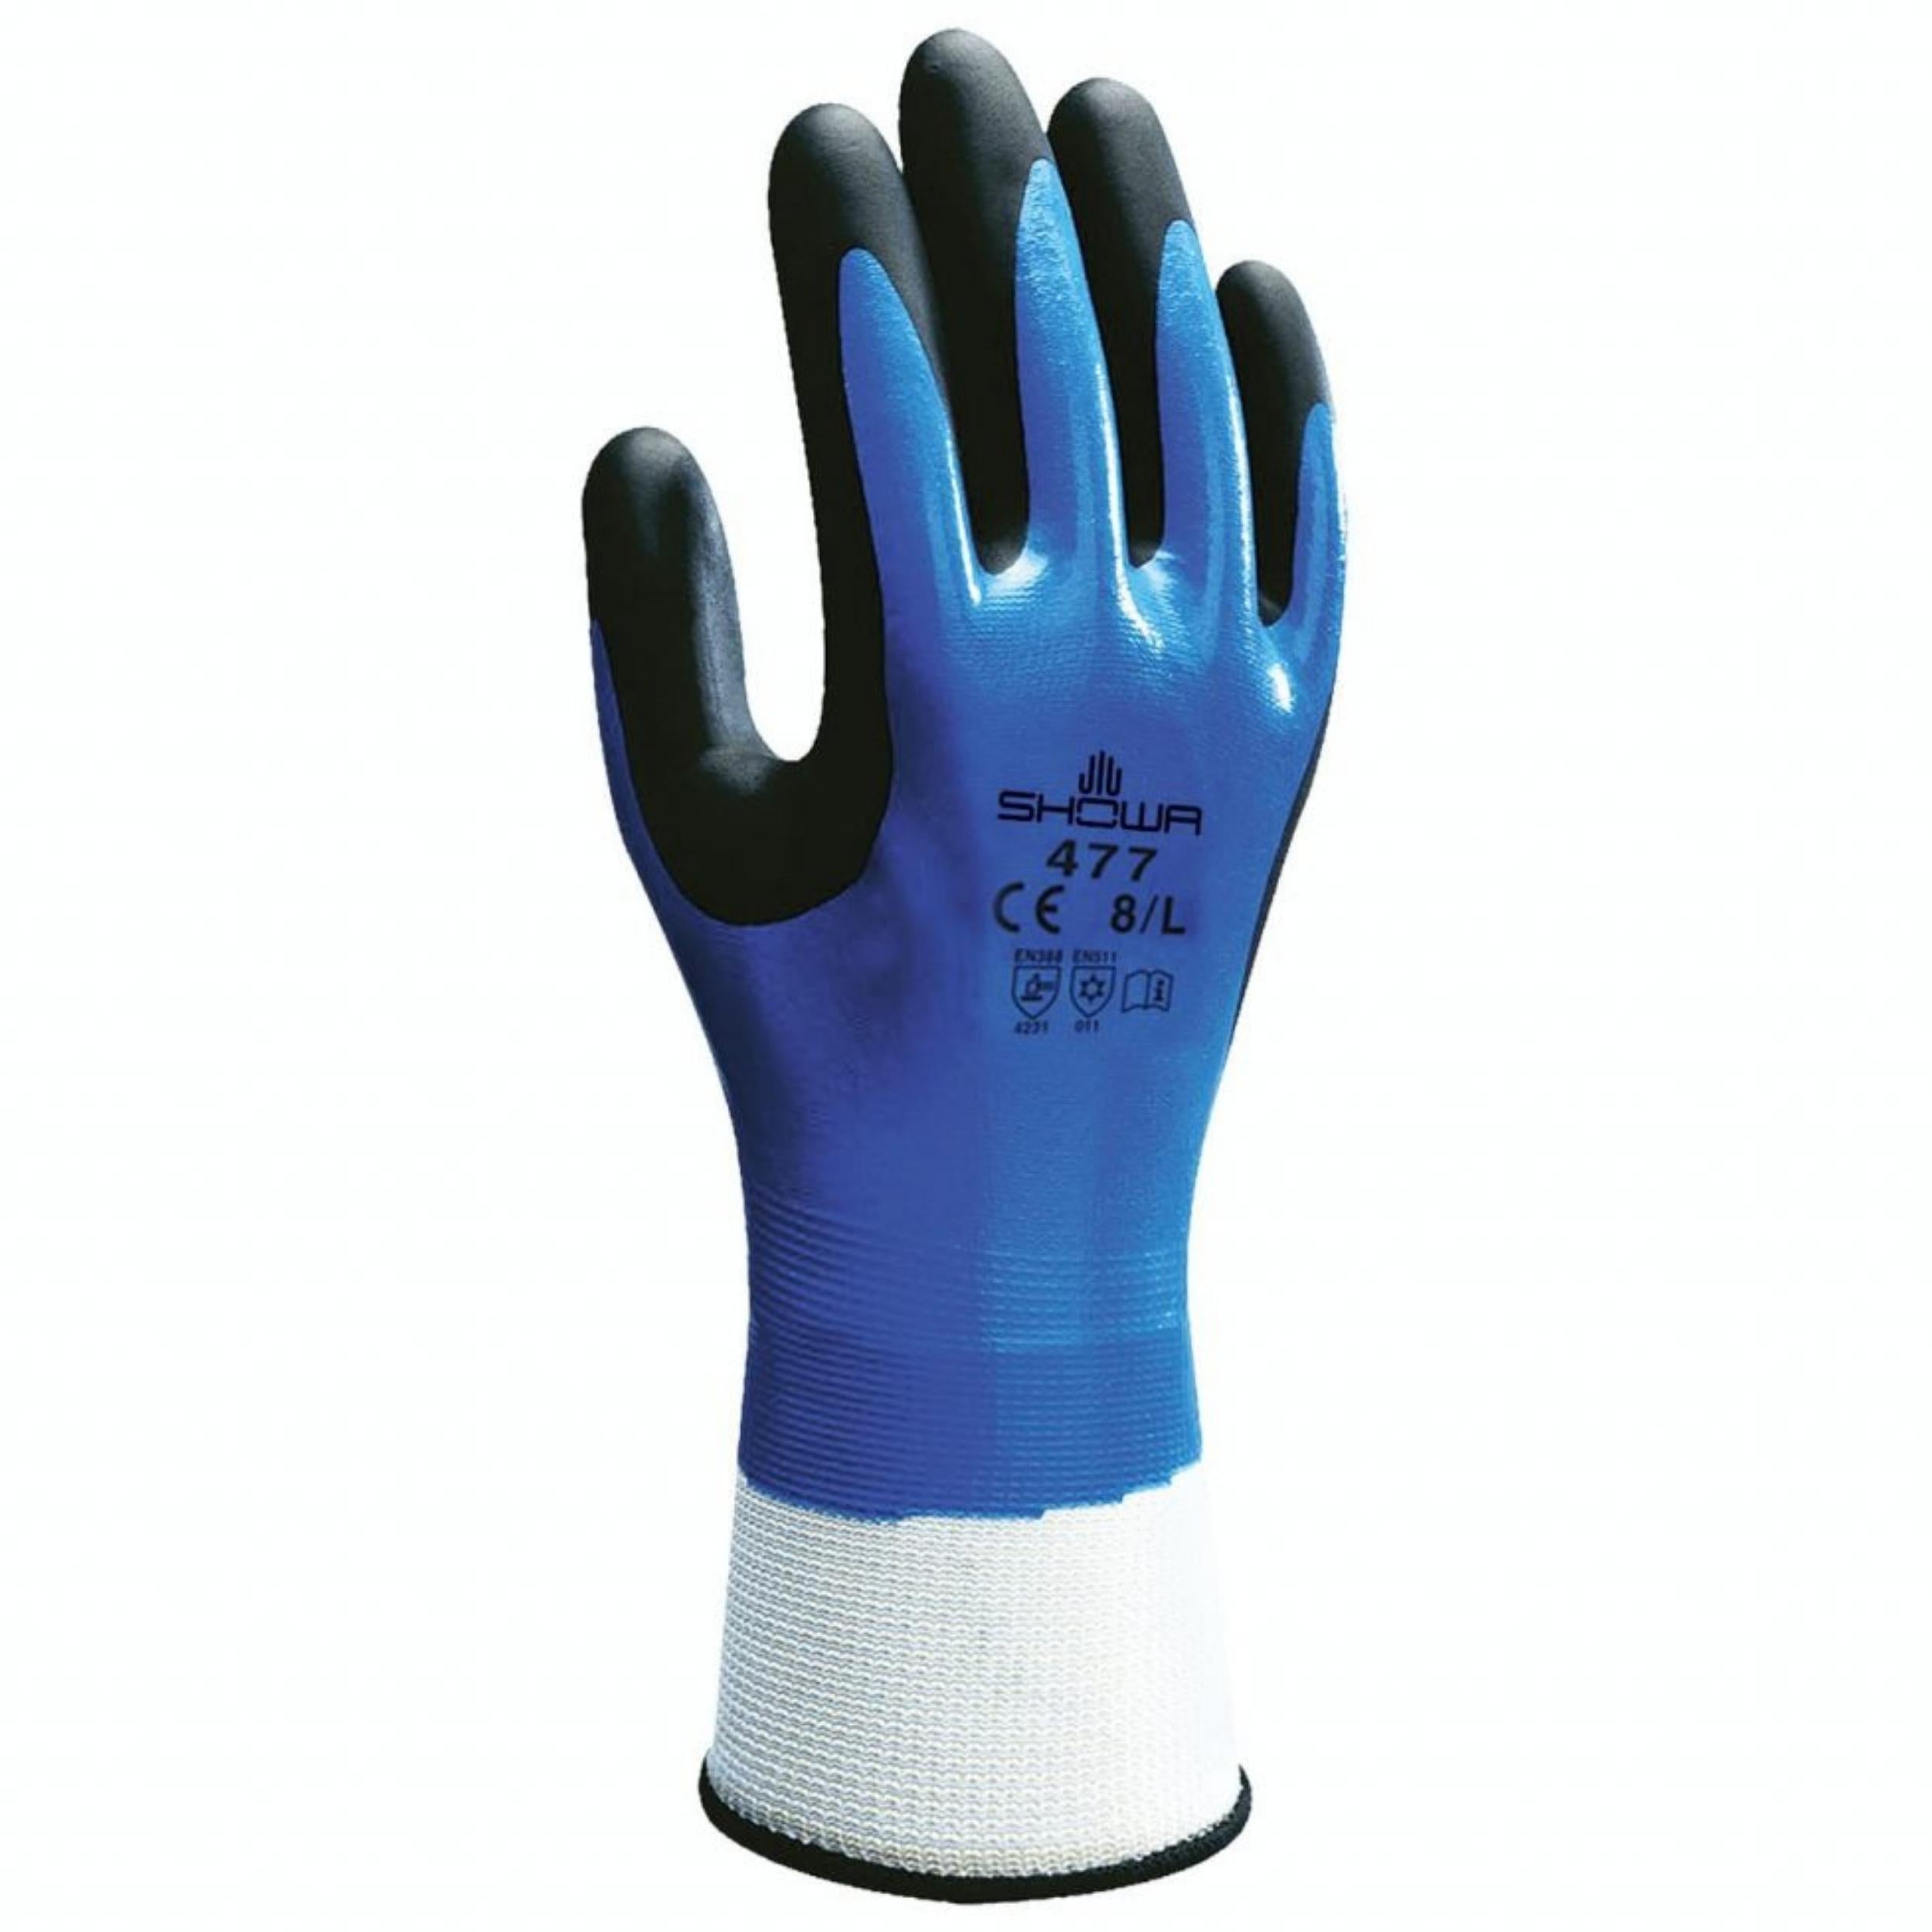 SHOWA 477 Thermal Insulation- Cold Weather Gloves 12 Pack